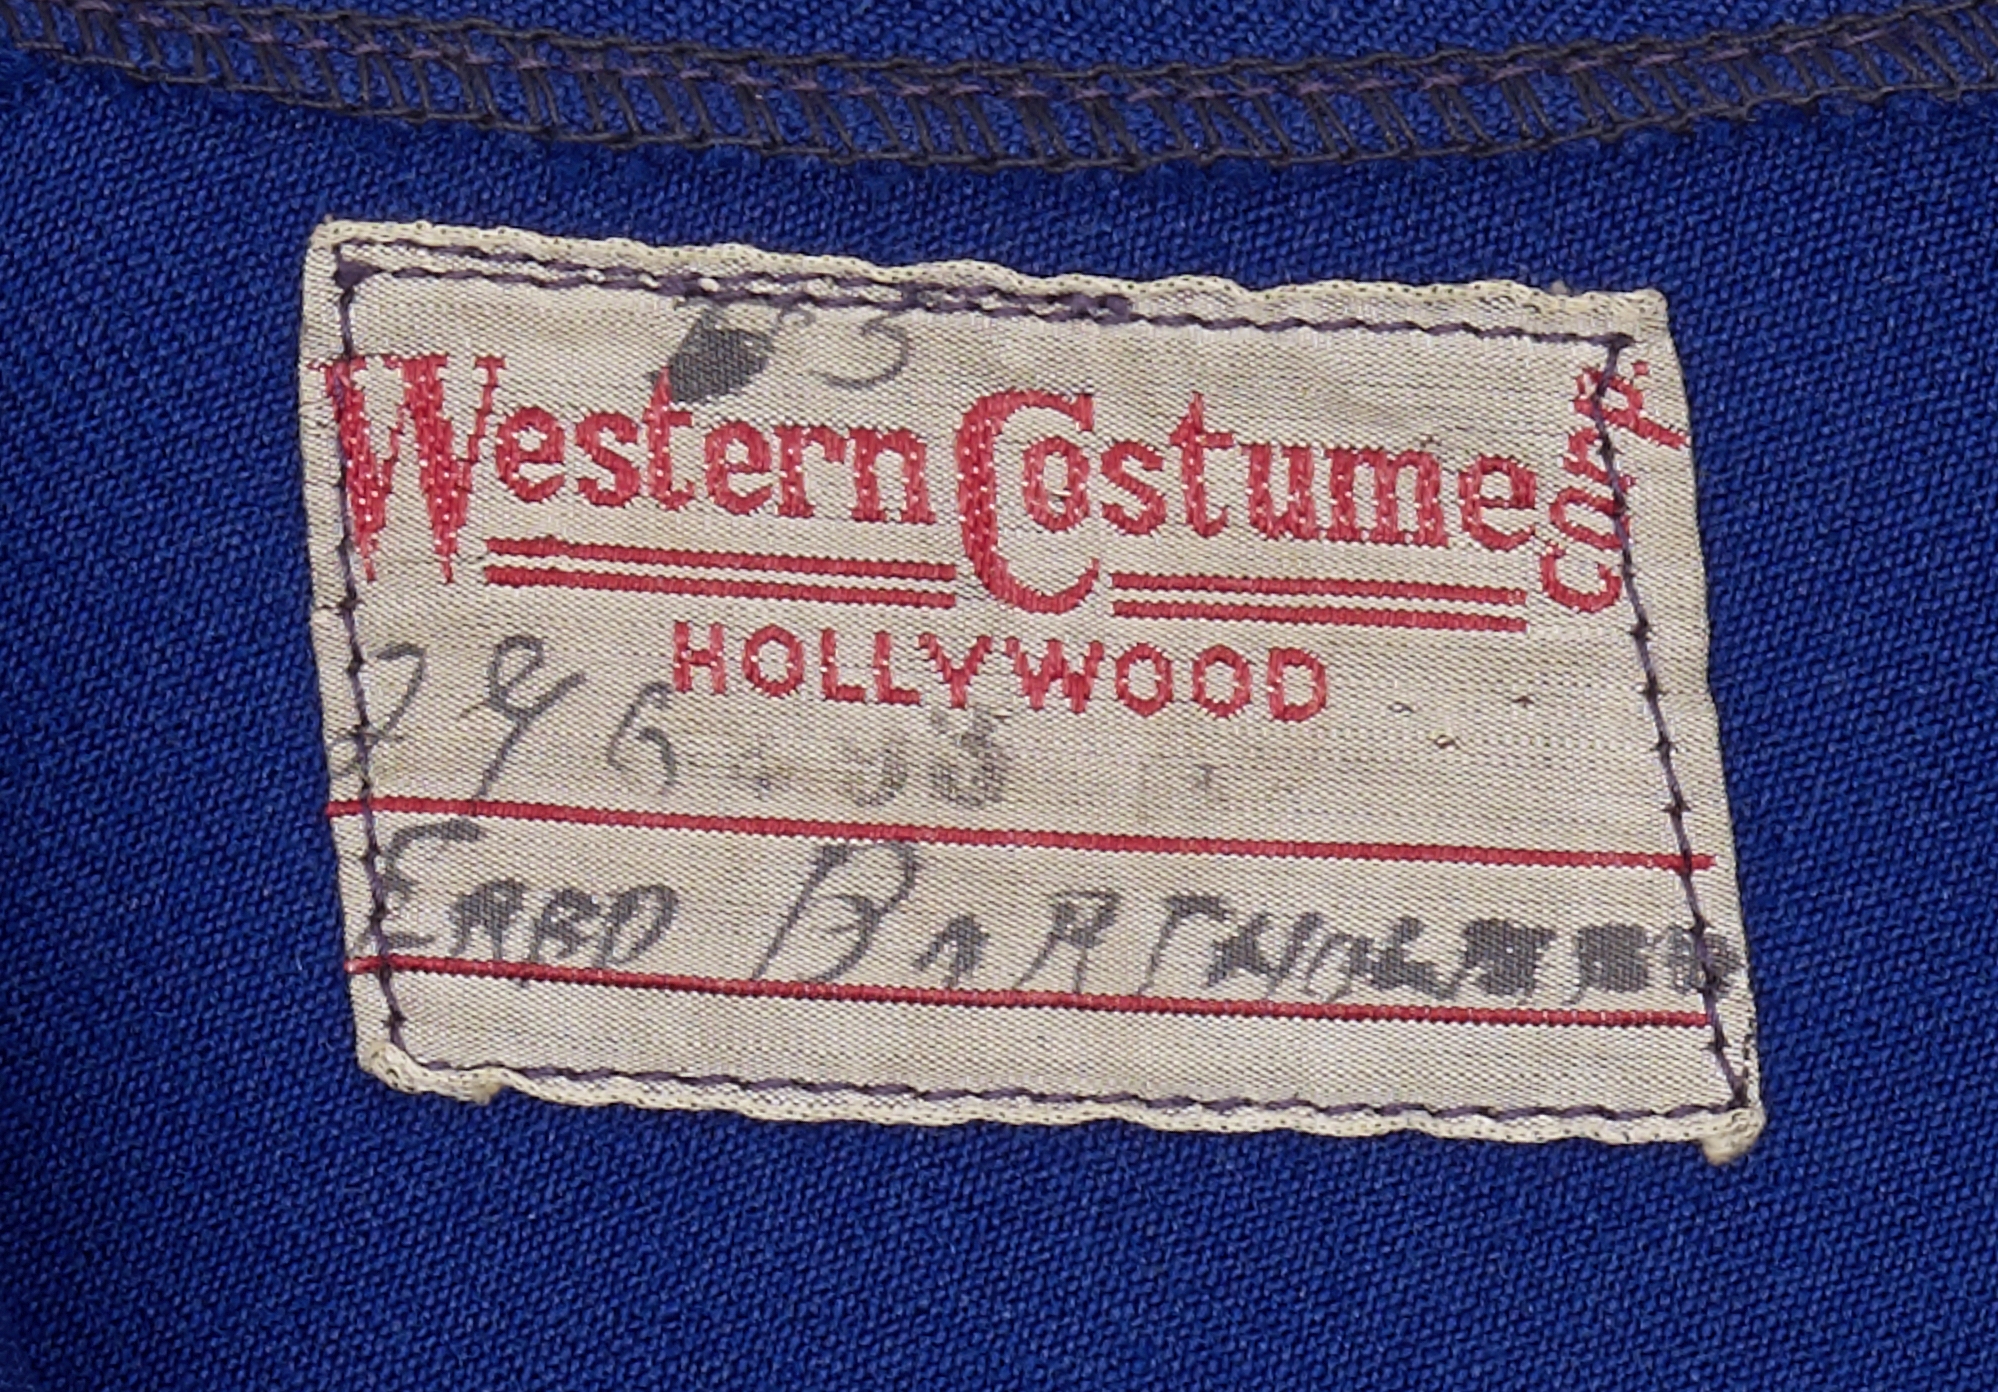 A Freddie Bartholomew sailor jacket from Little Lord Fauntleroy